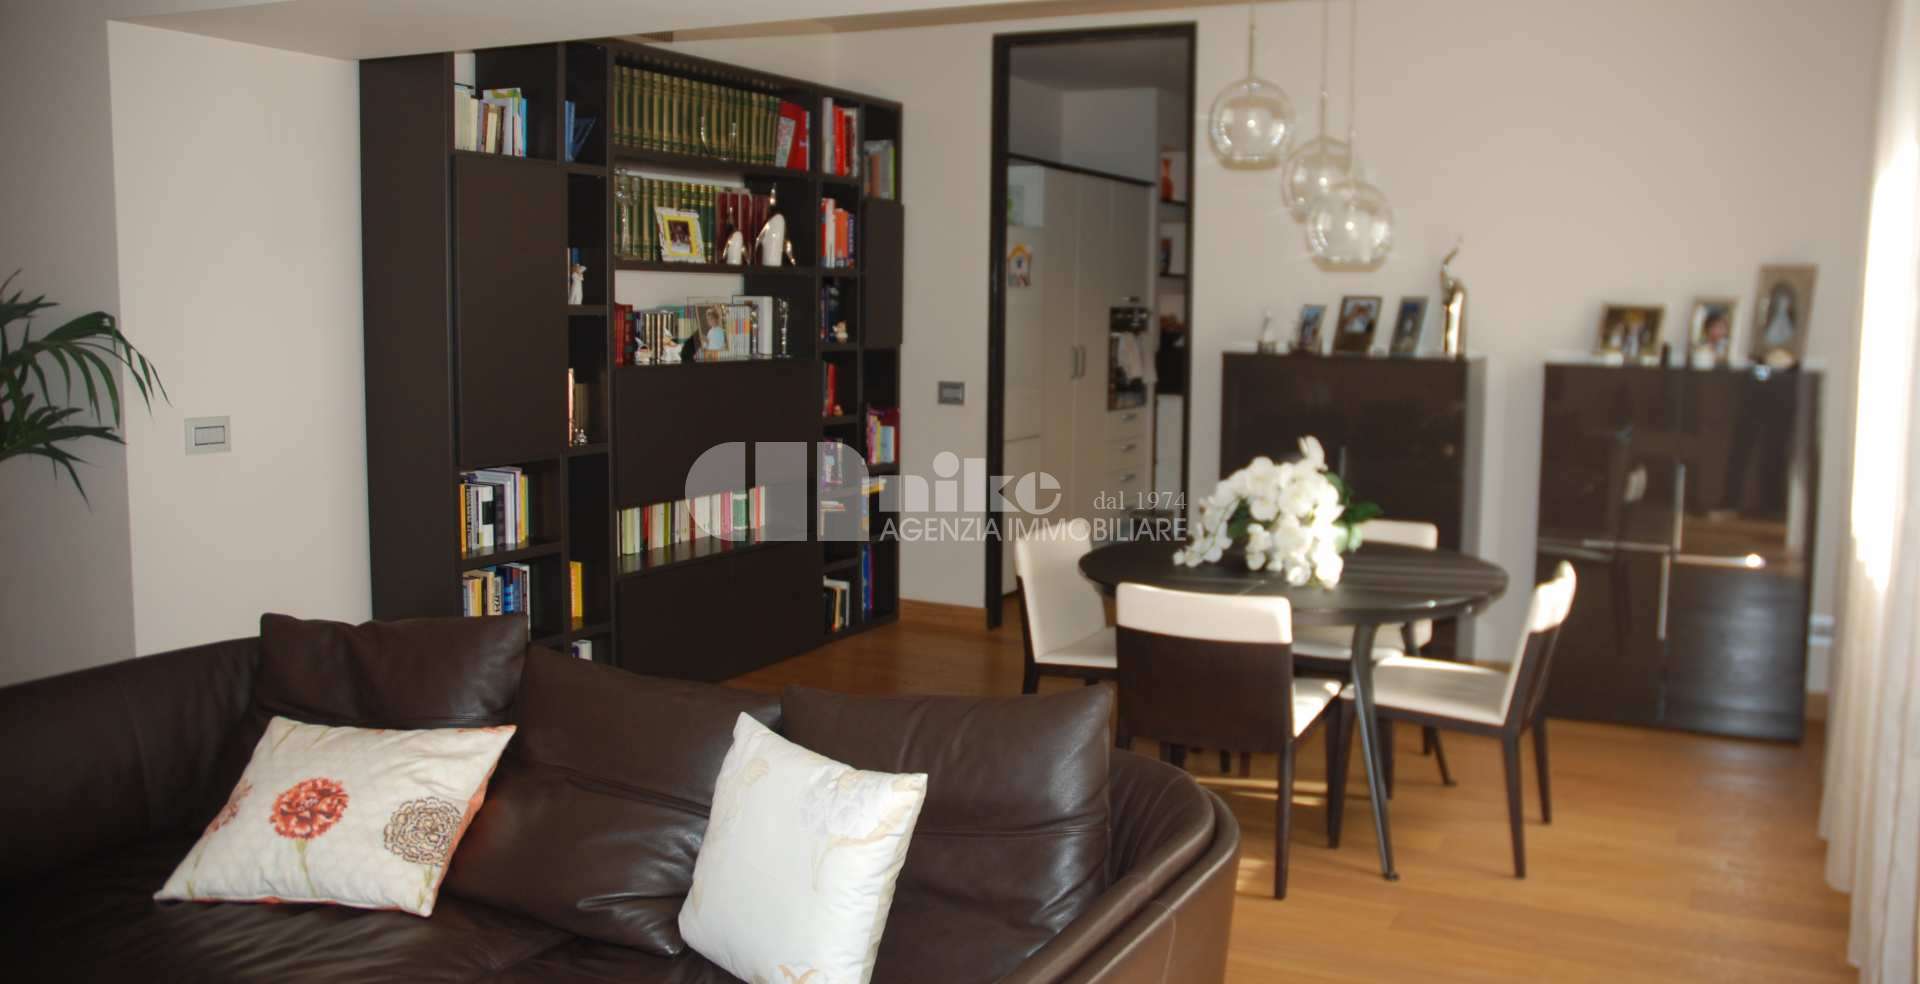 Four-room renovated apartment